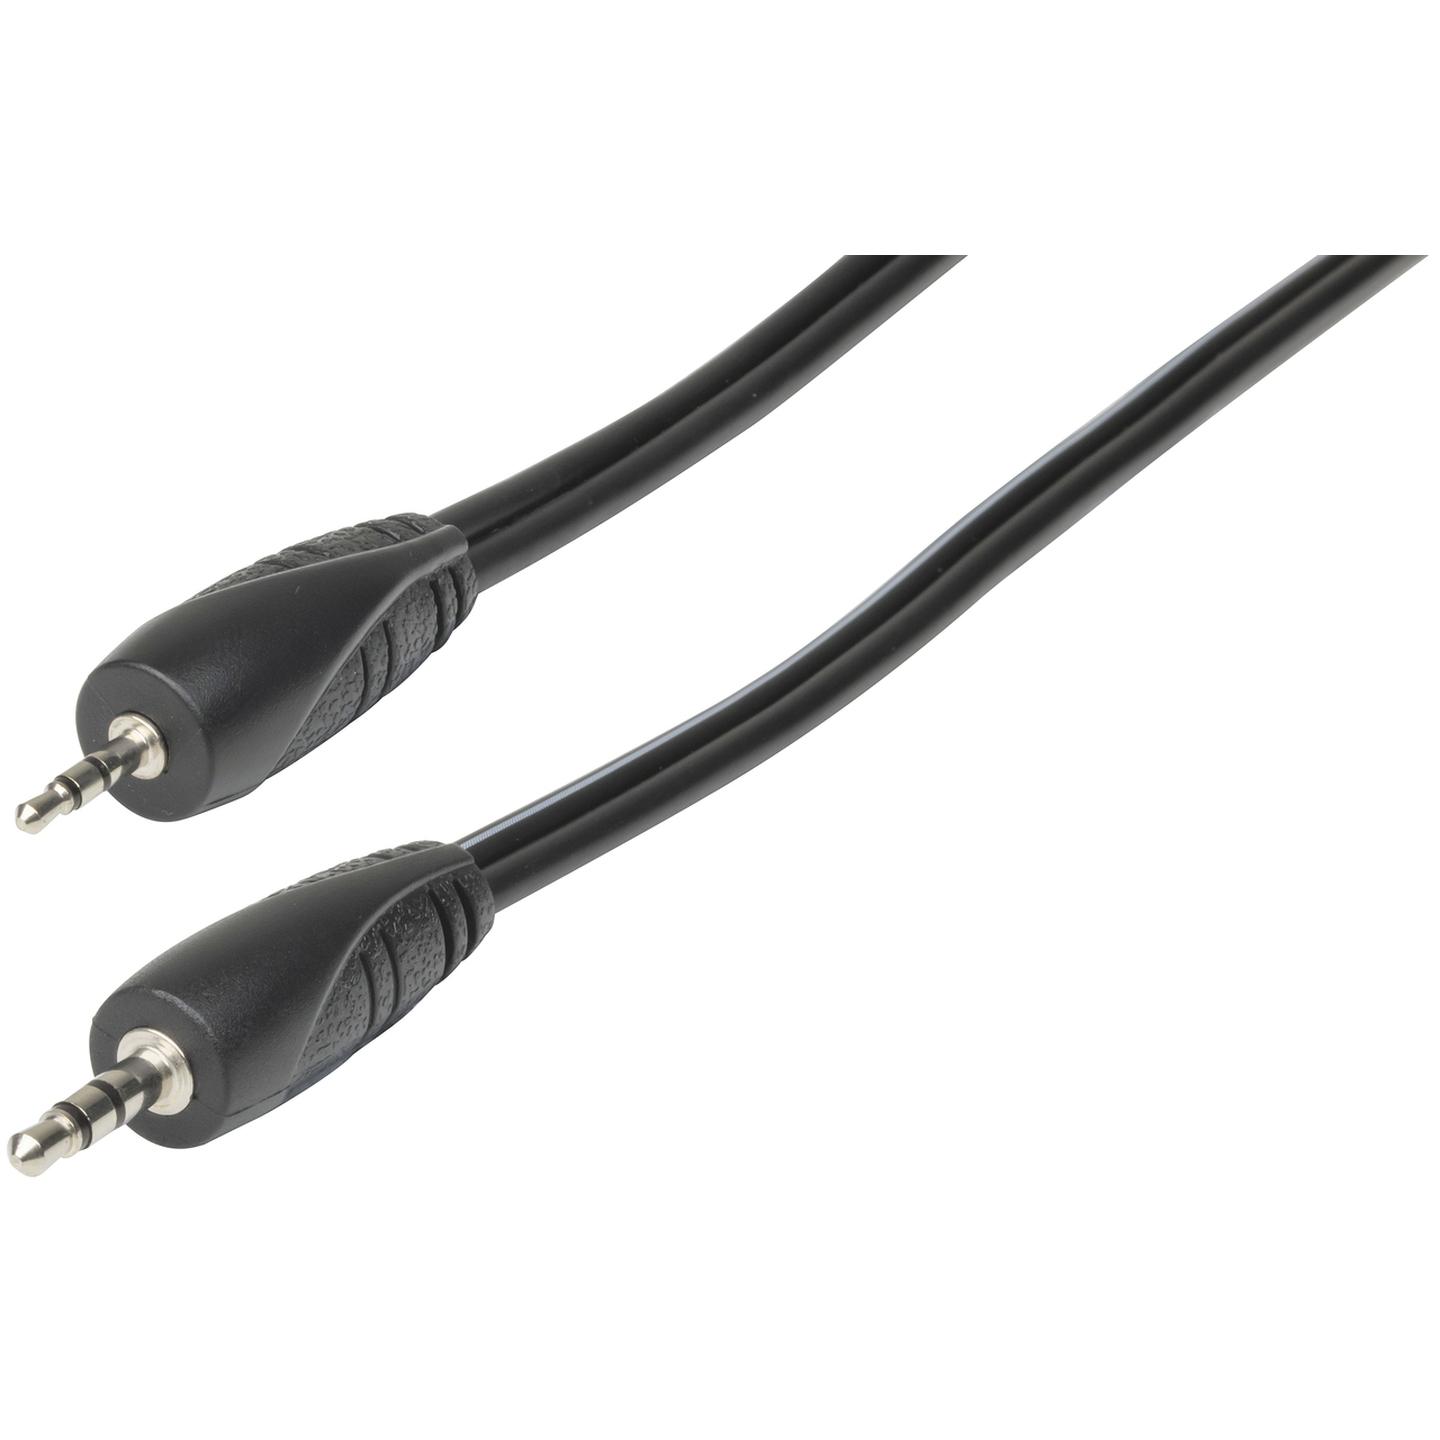 1.5m 2.5mm Stereo Plug to 3.5mm Stereo Plug Audio Cable